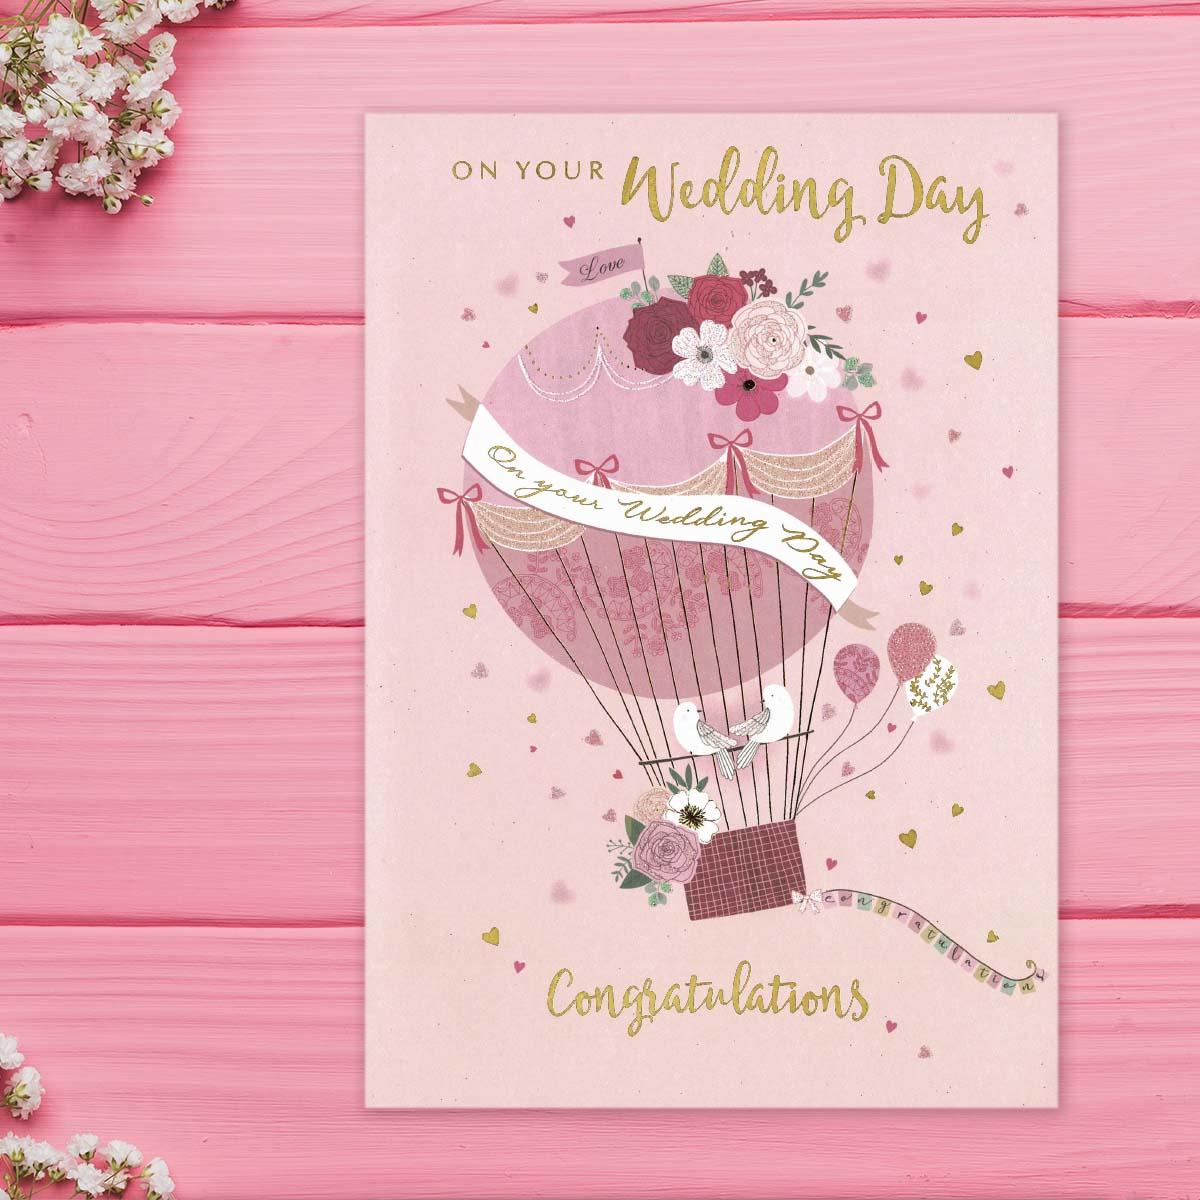 On Your Wedding Day Congratulations Card Front Image